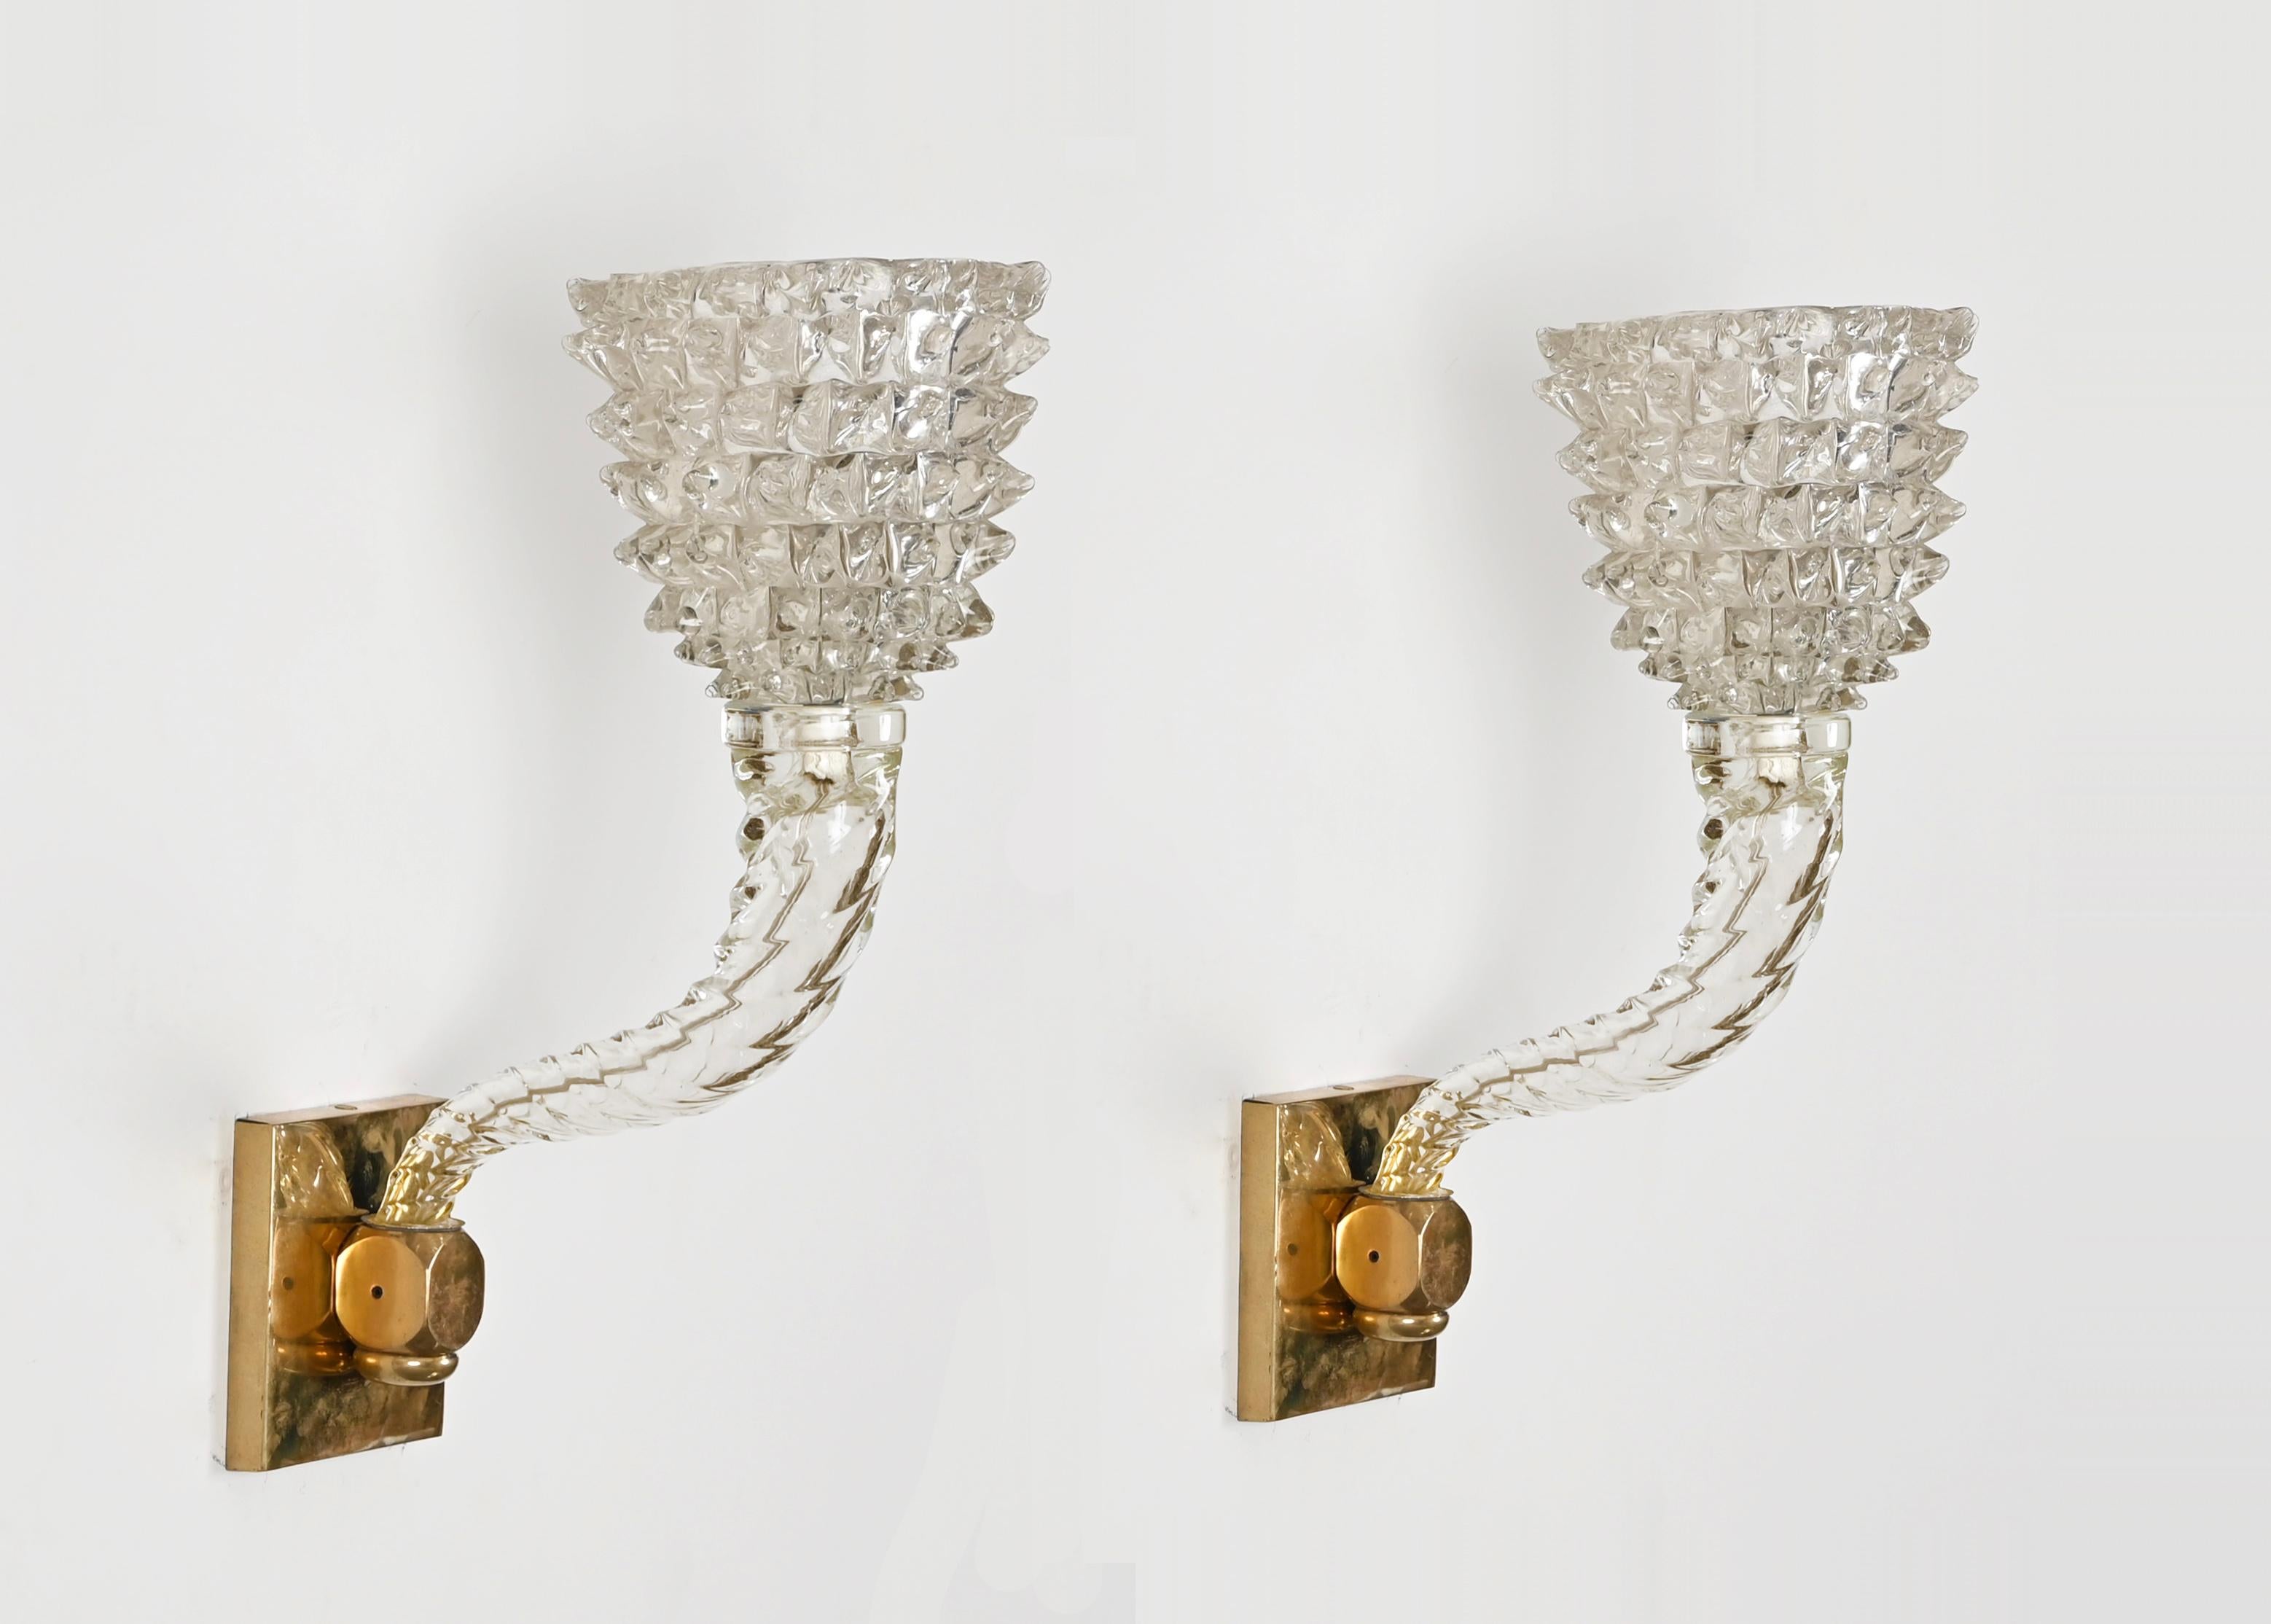 Pair of Barovier Murano Rostrato Twisted Glass and Brass Sconces, Italy 1950s For Sale 2